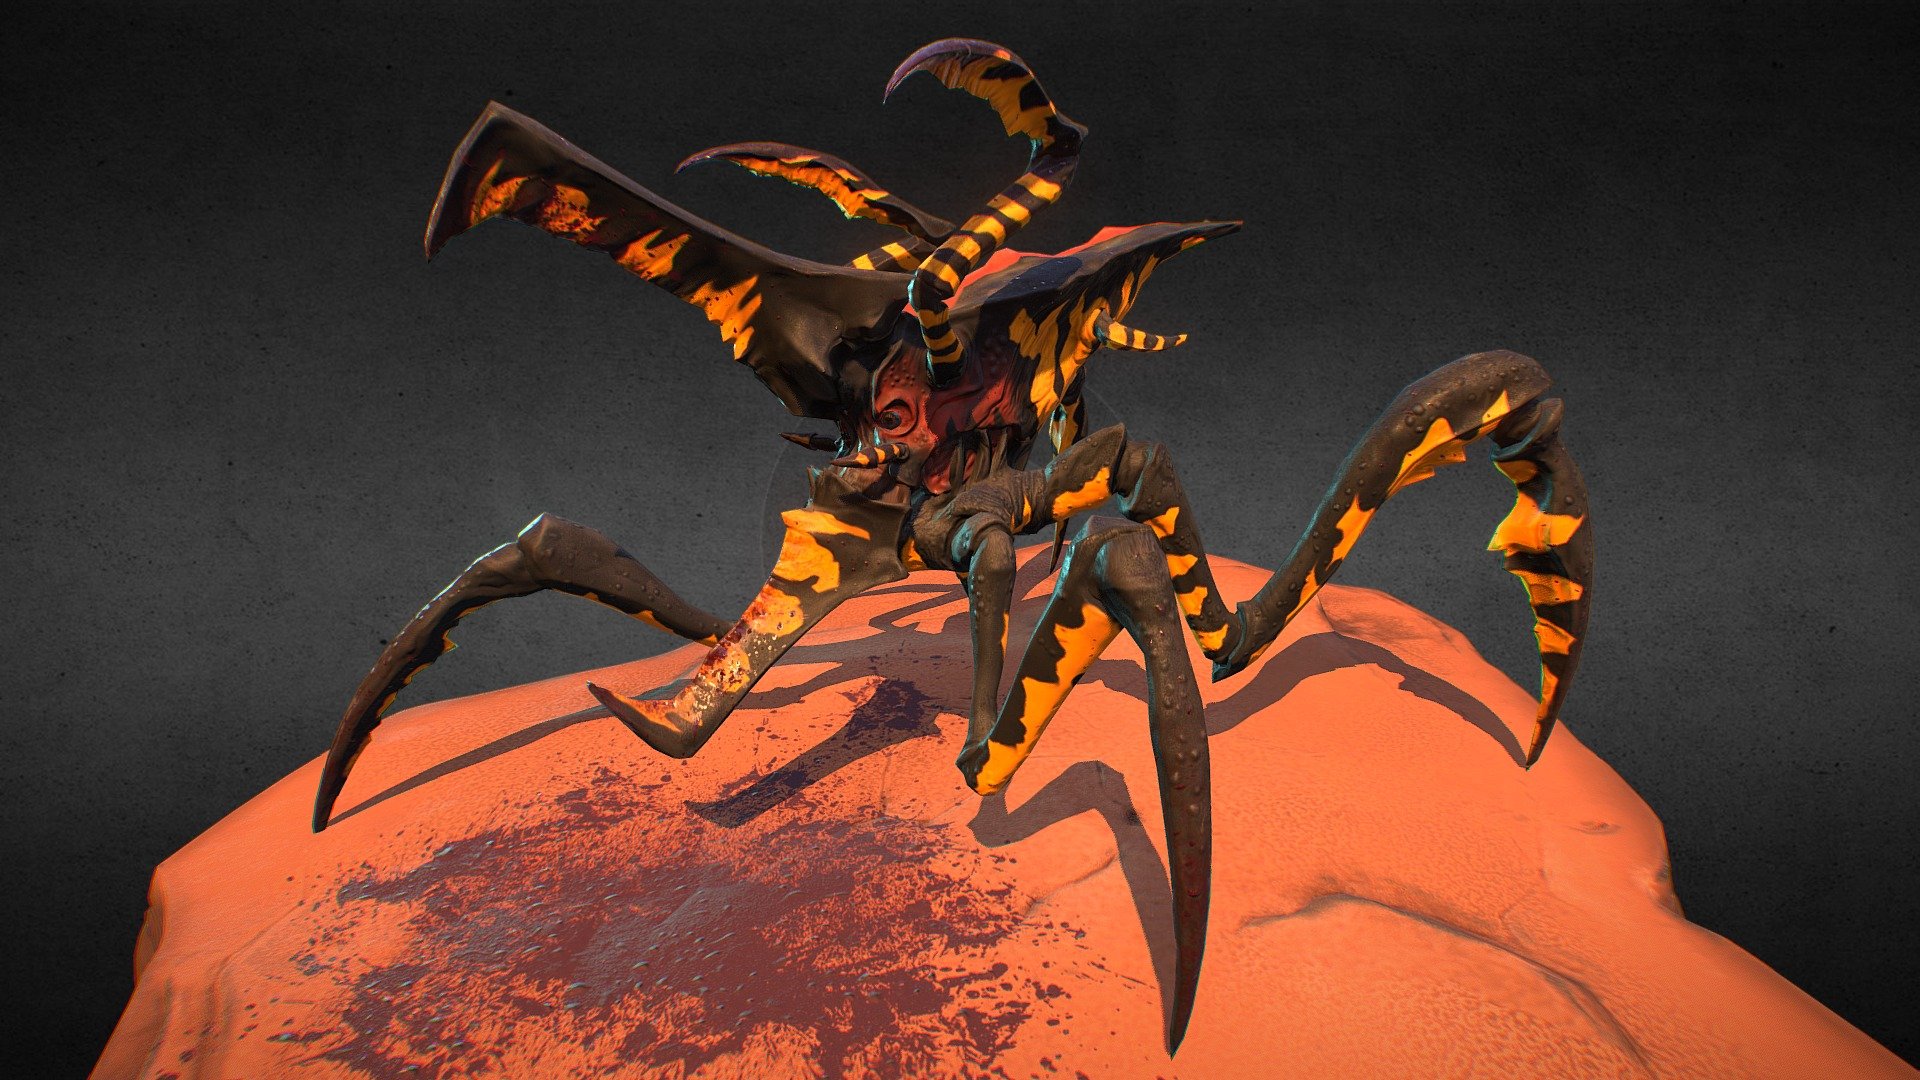 Fan art I did of the Arachinid creature from the film Starship Troopers 3d model